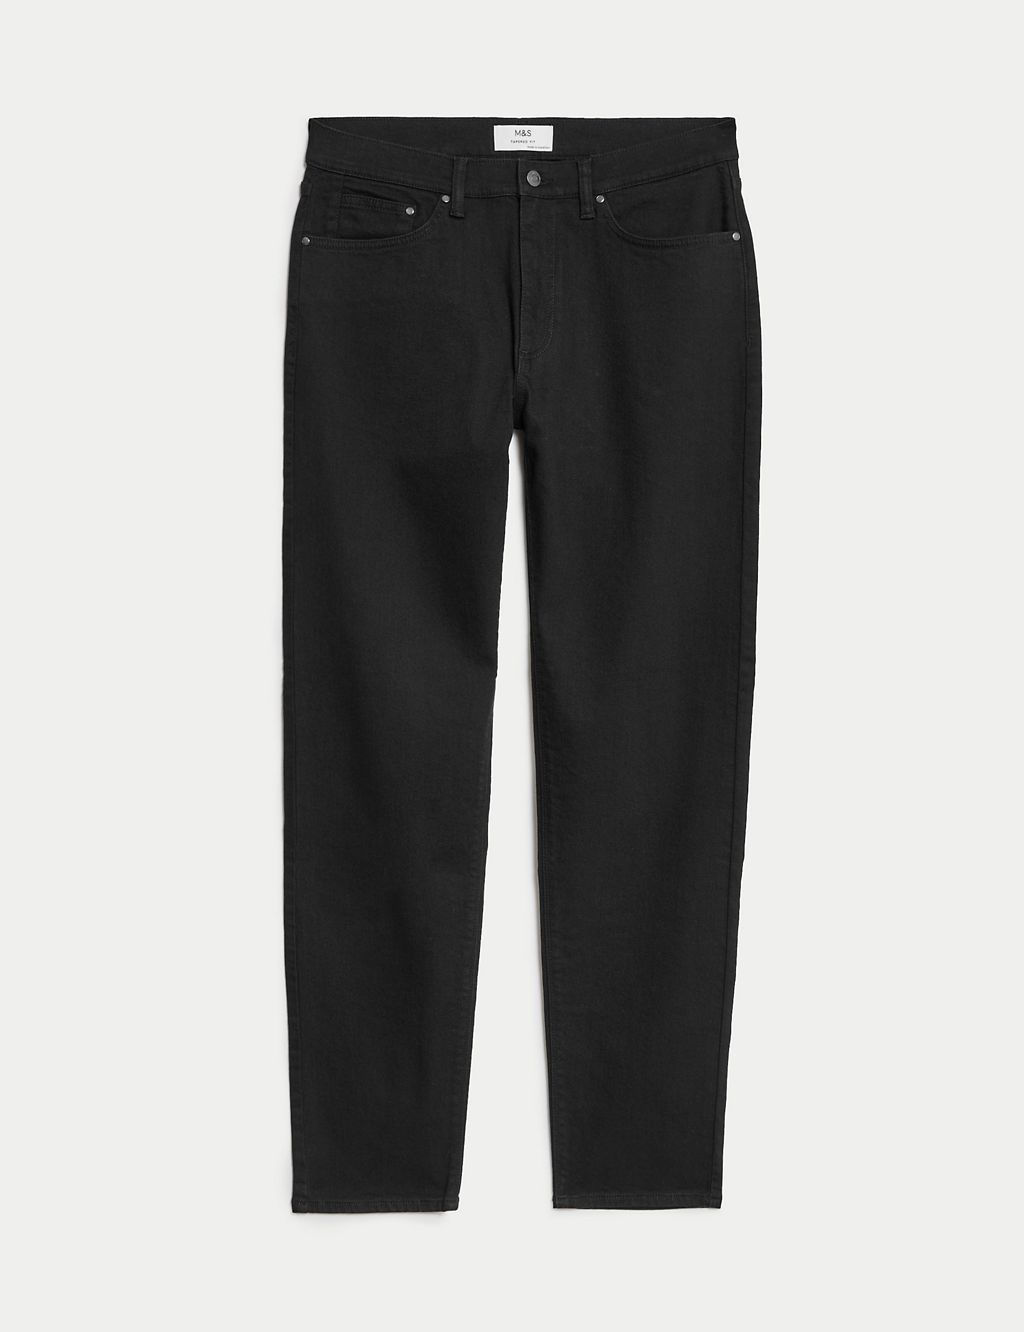 Tapered Fit Stretch Jeans | M&S Collection | M&S